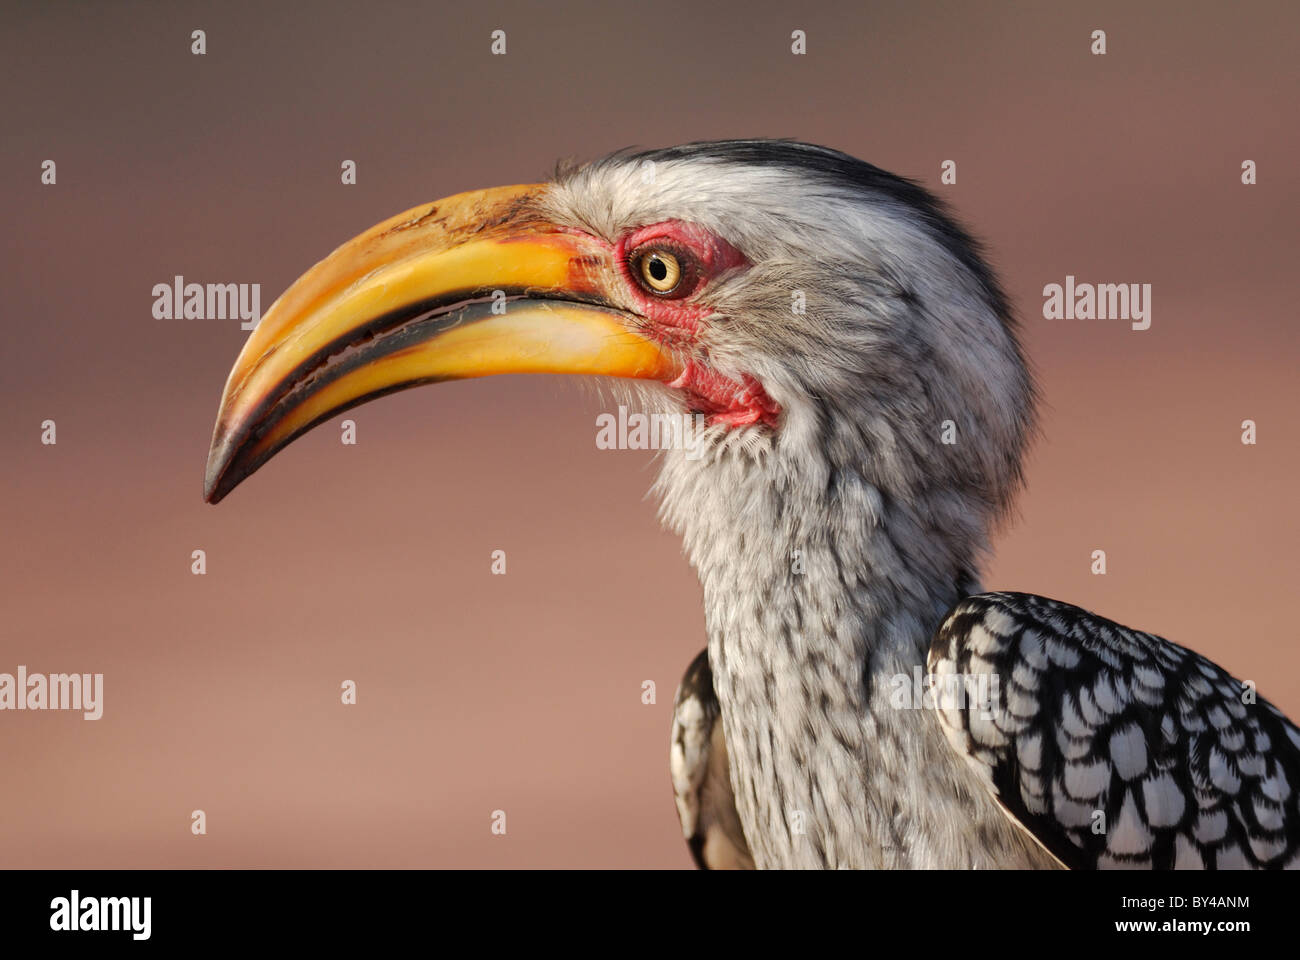 Southern Yellow-billed Hornbill (Tockus leucomelas) inf Kruger National Park, South Africa. Stock Photo